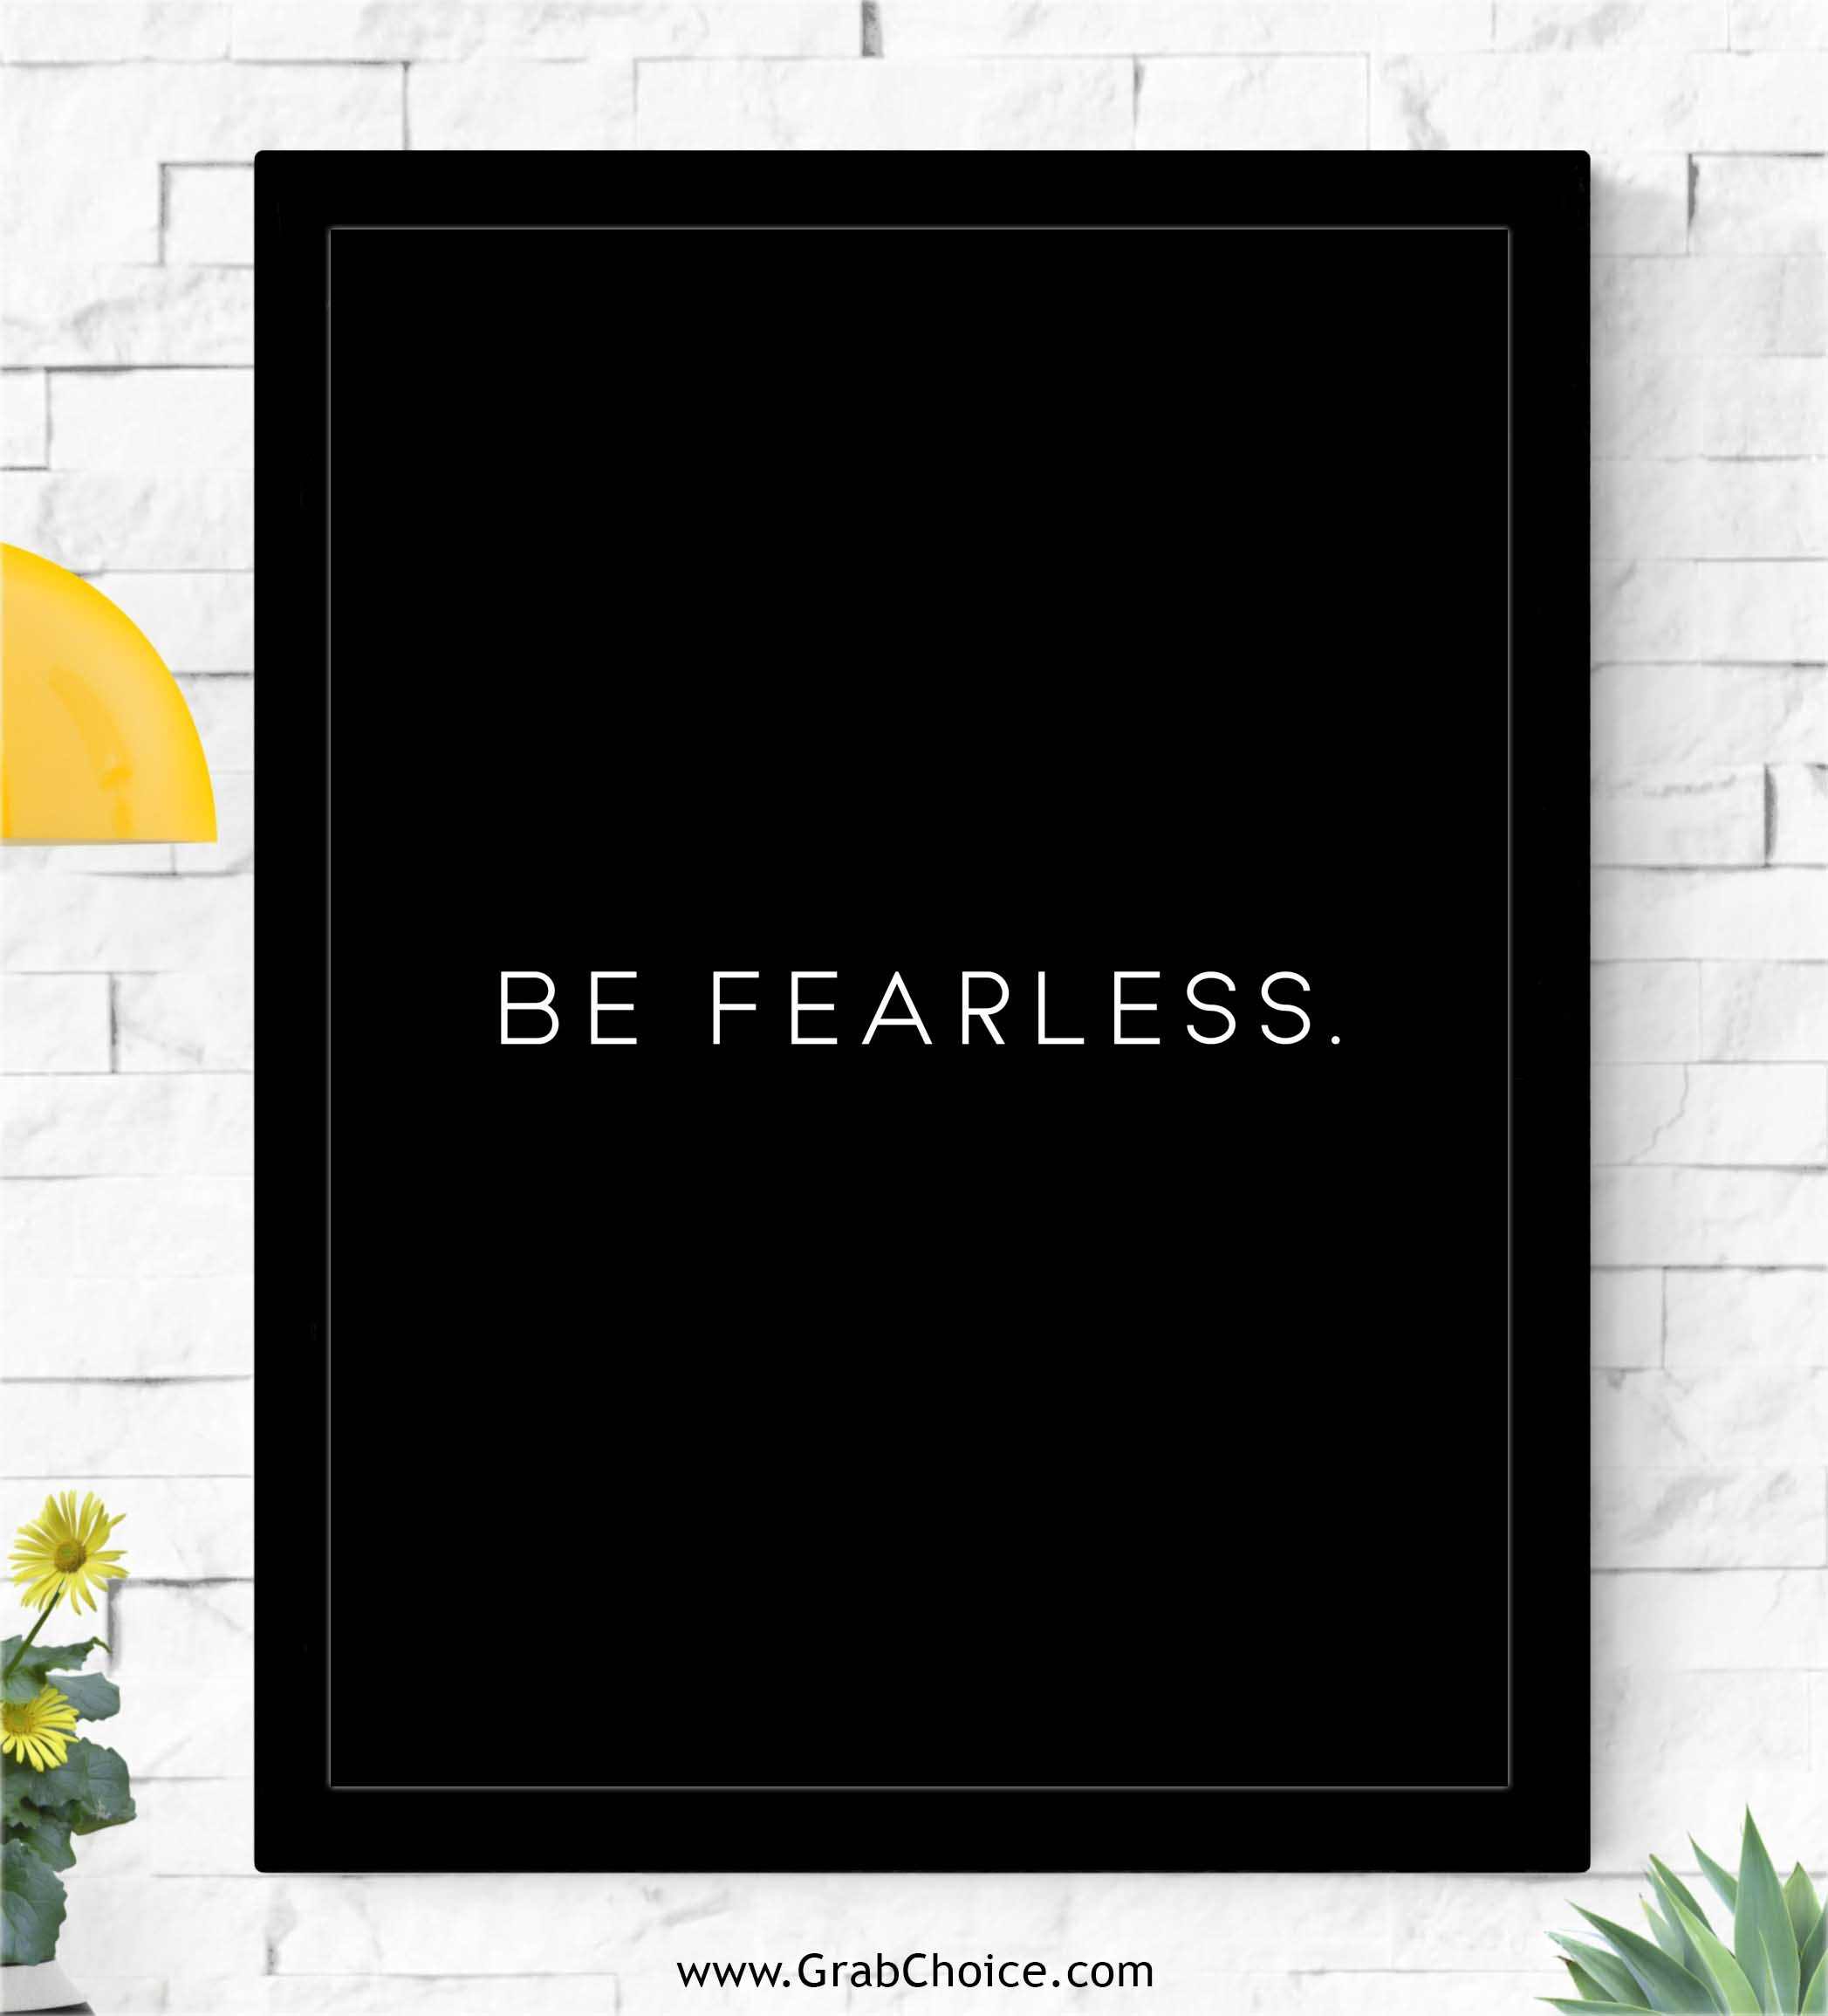 https://www.grabchoice.com/image/cache/catalog/products/poster%20and%20frame/be%20fearless%20wall%20frame-2095x2310.jpg